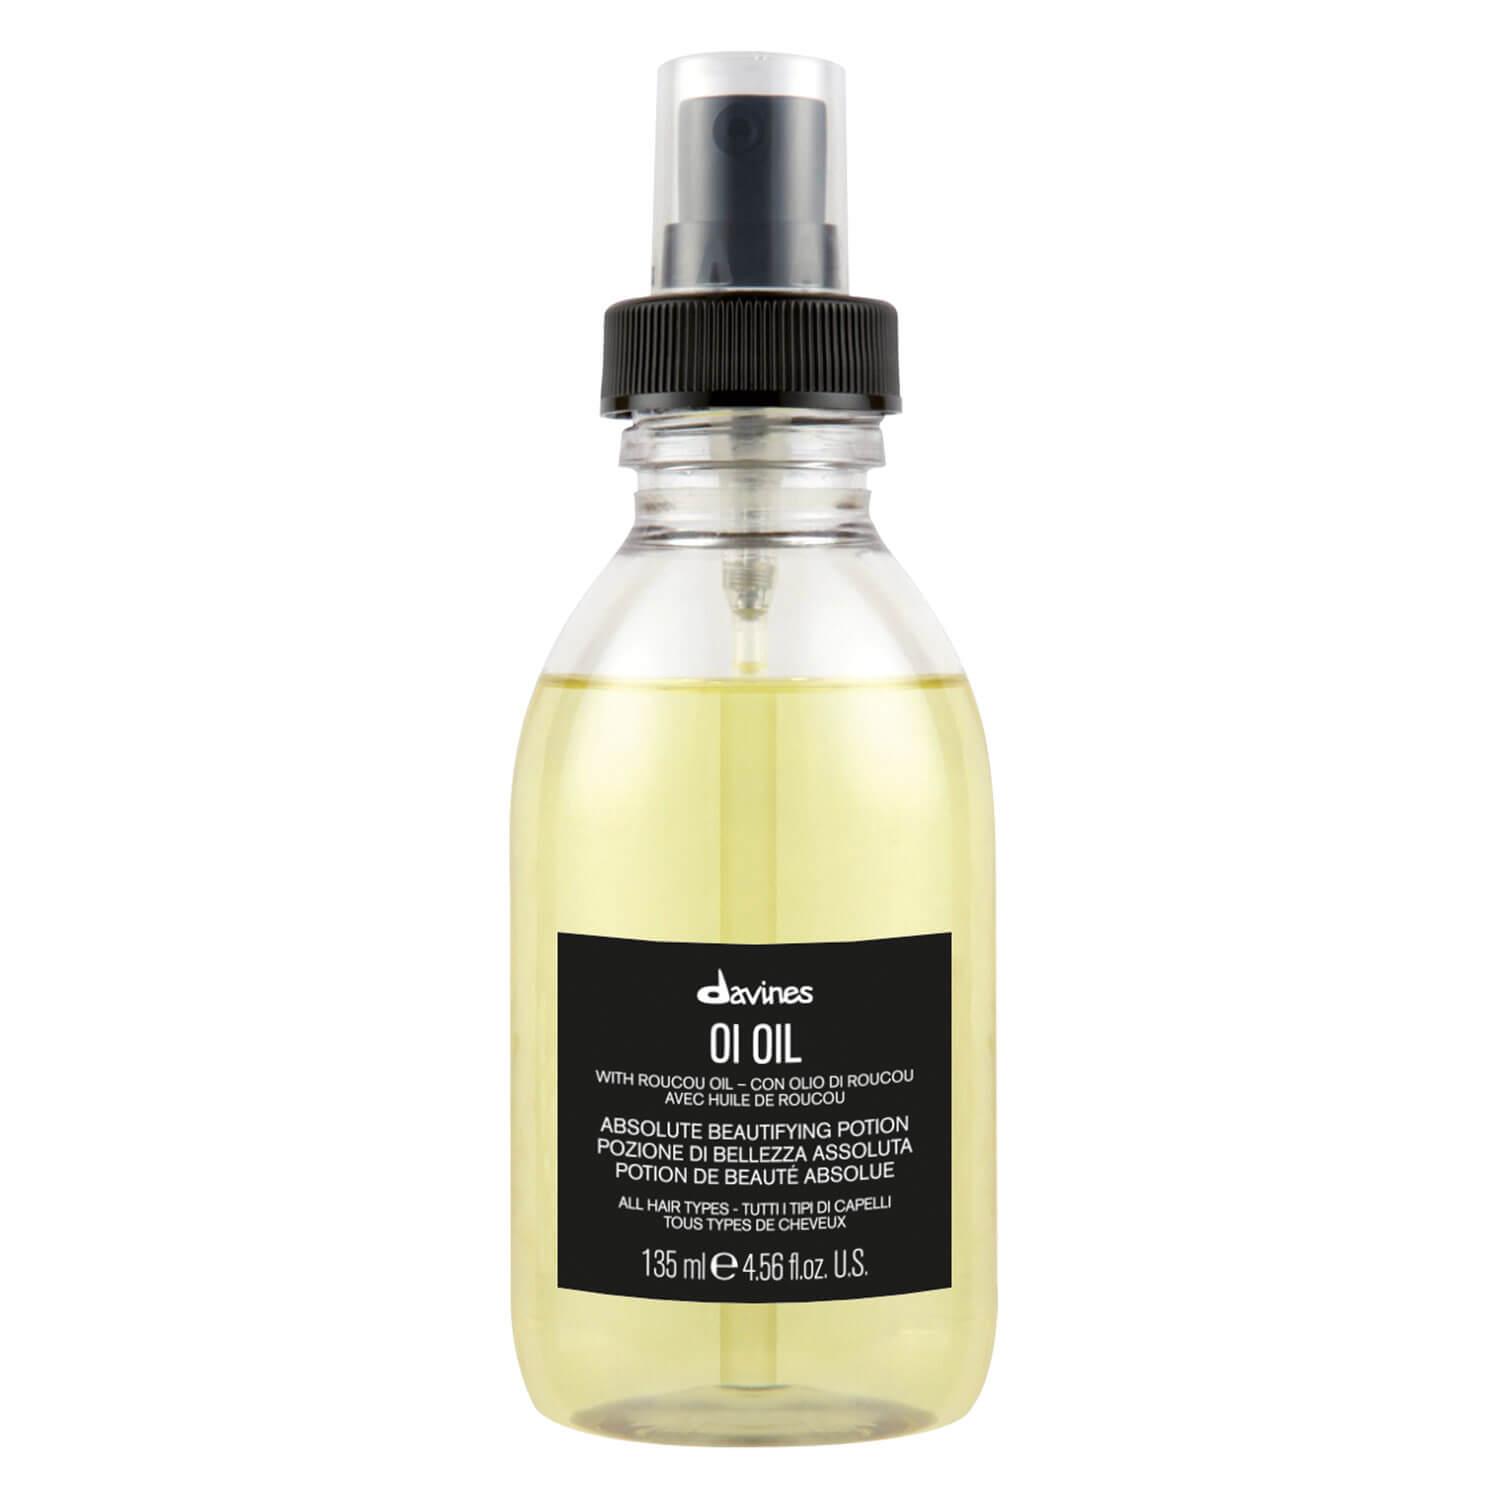 Oi - Oil Absolute Beautifying Potion